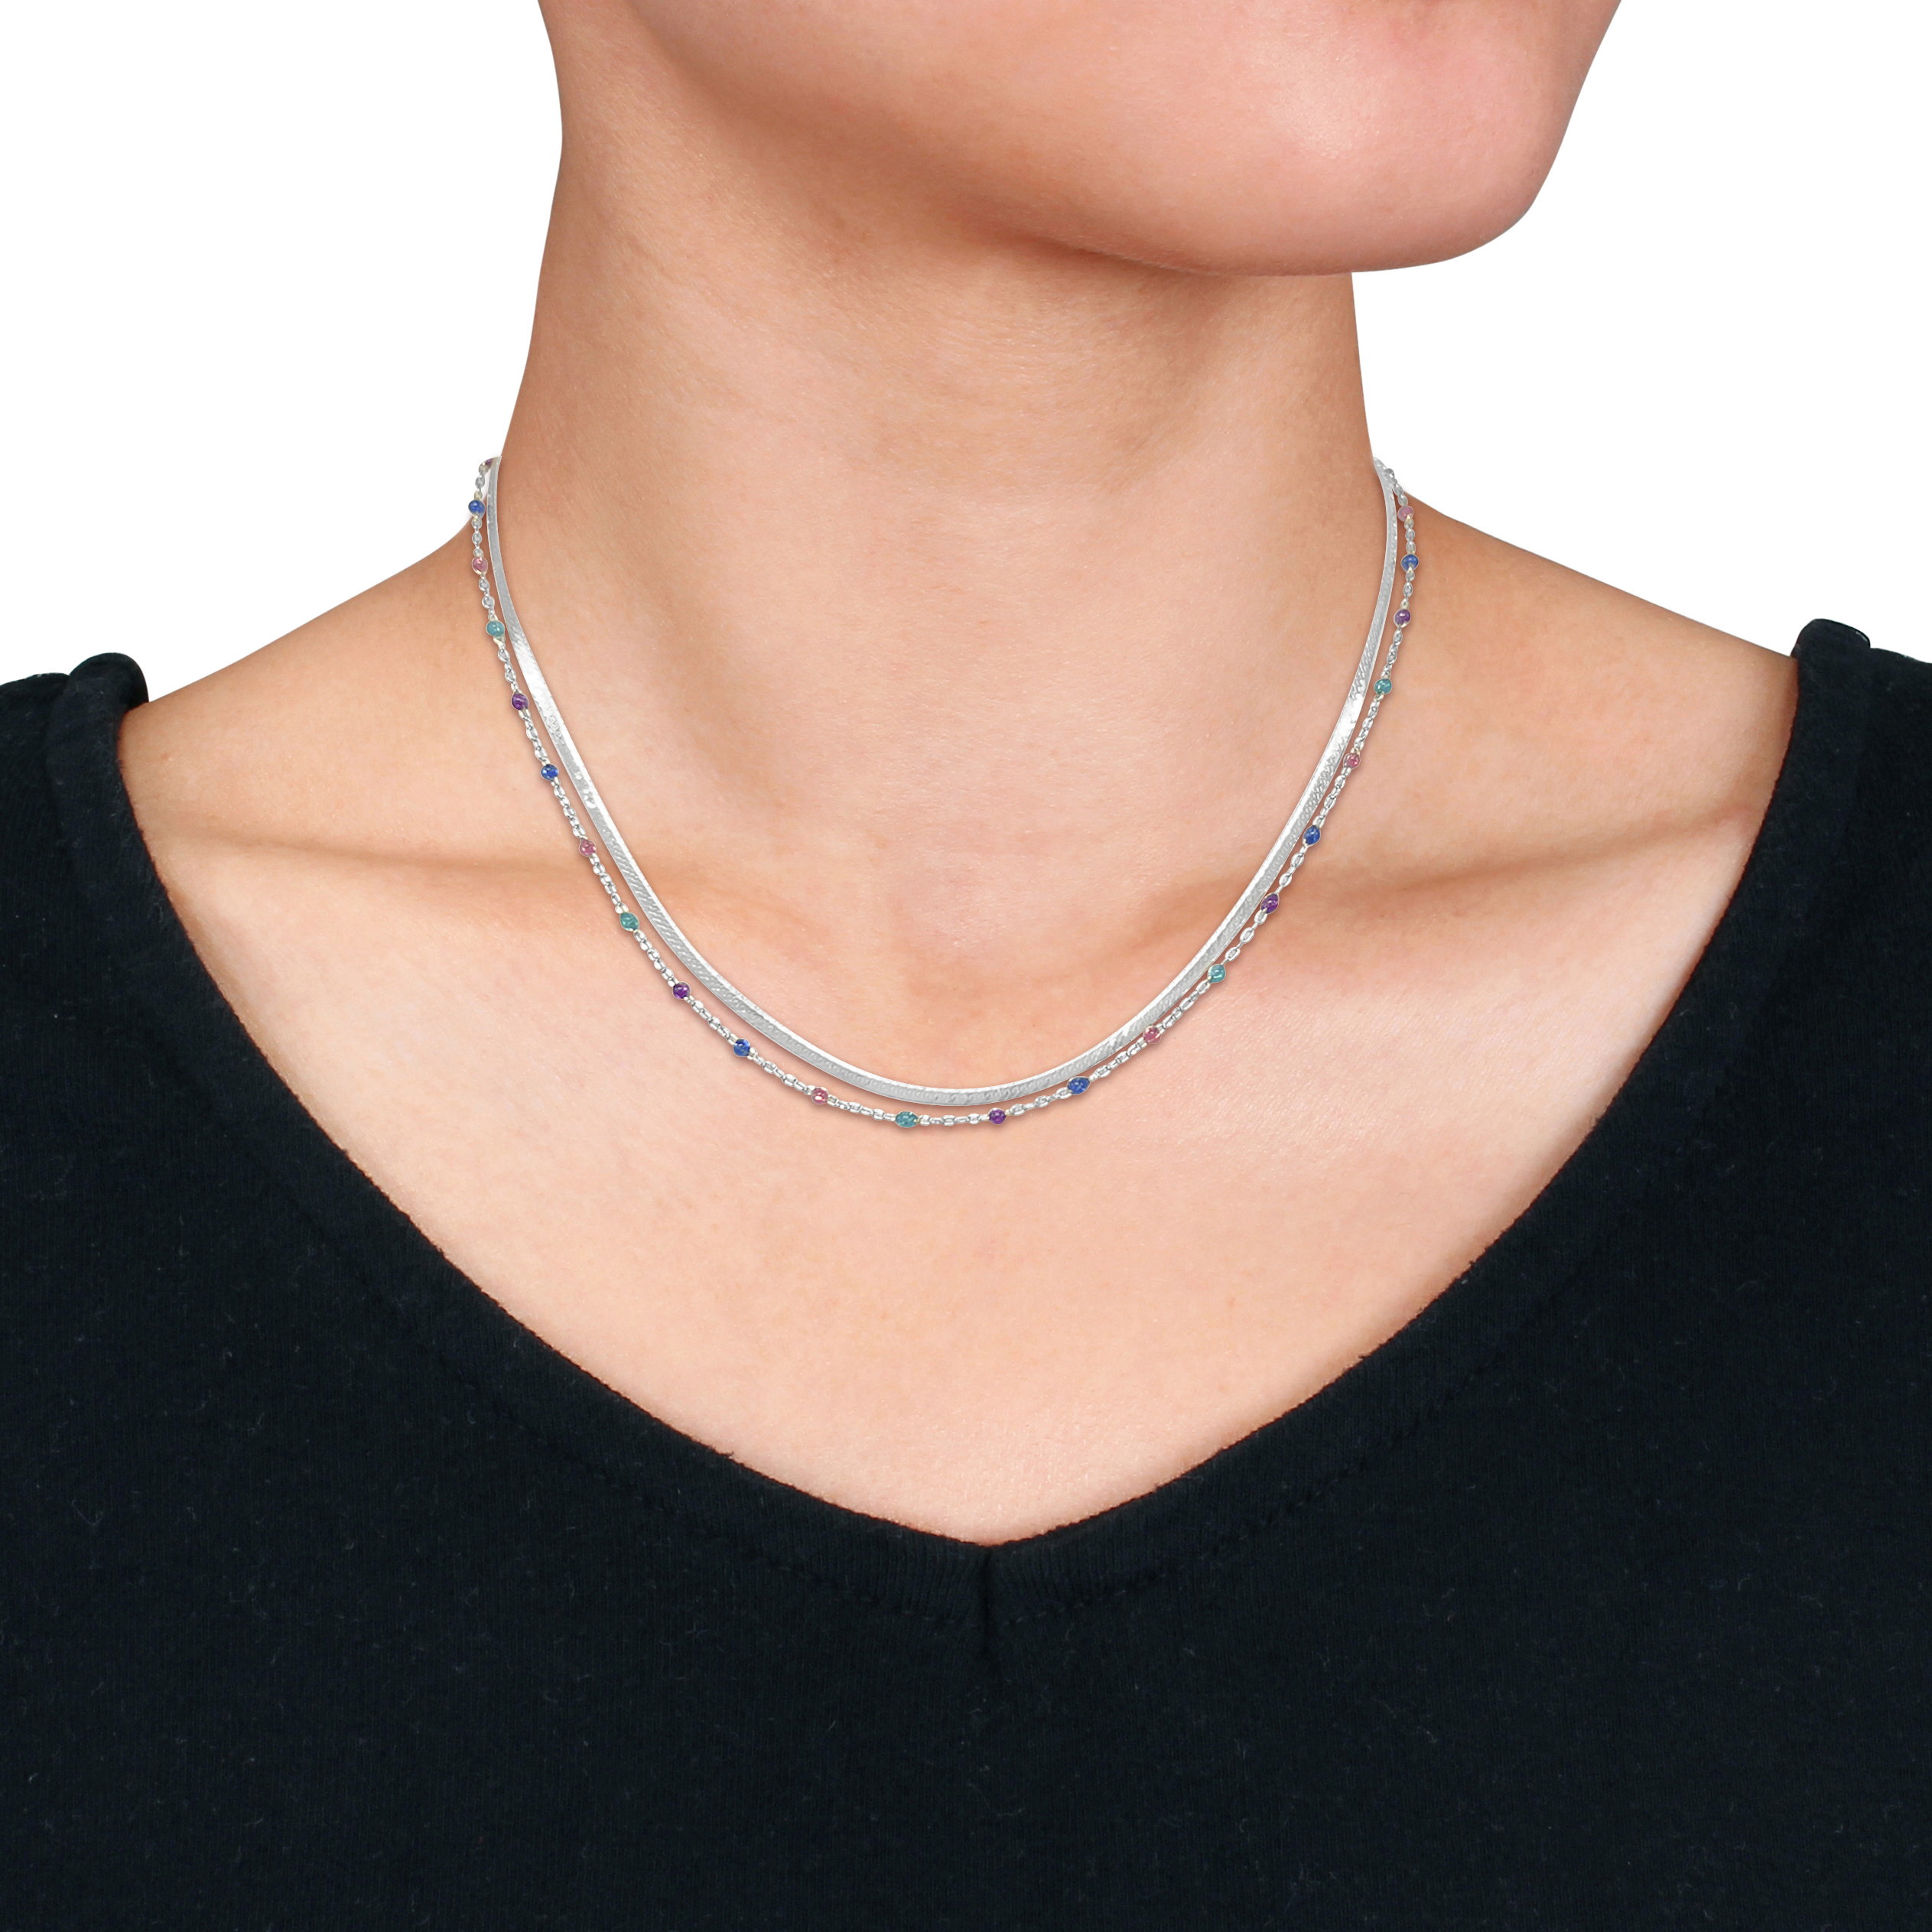 Multi-Color Bead Double Strand Herringbone Necklace in Sterling Silver - 15+2 in.